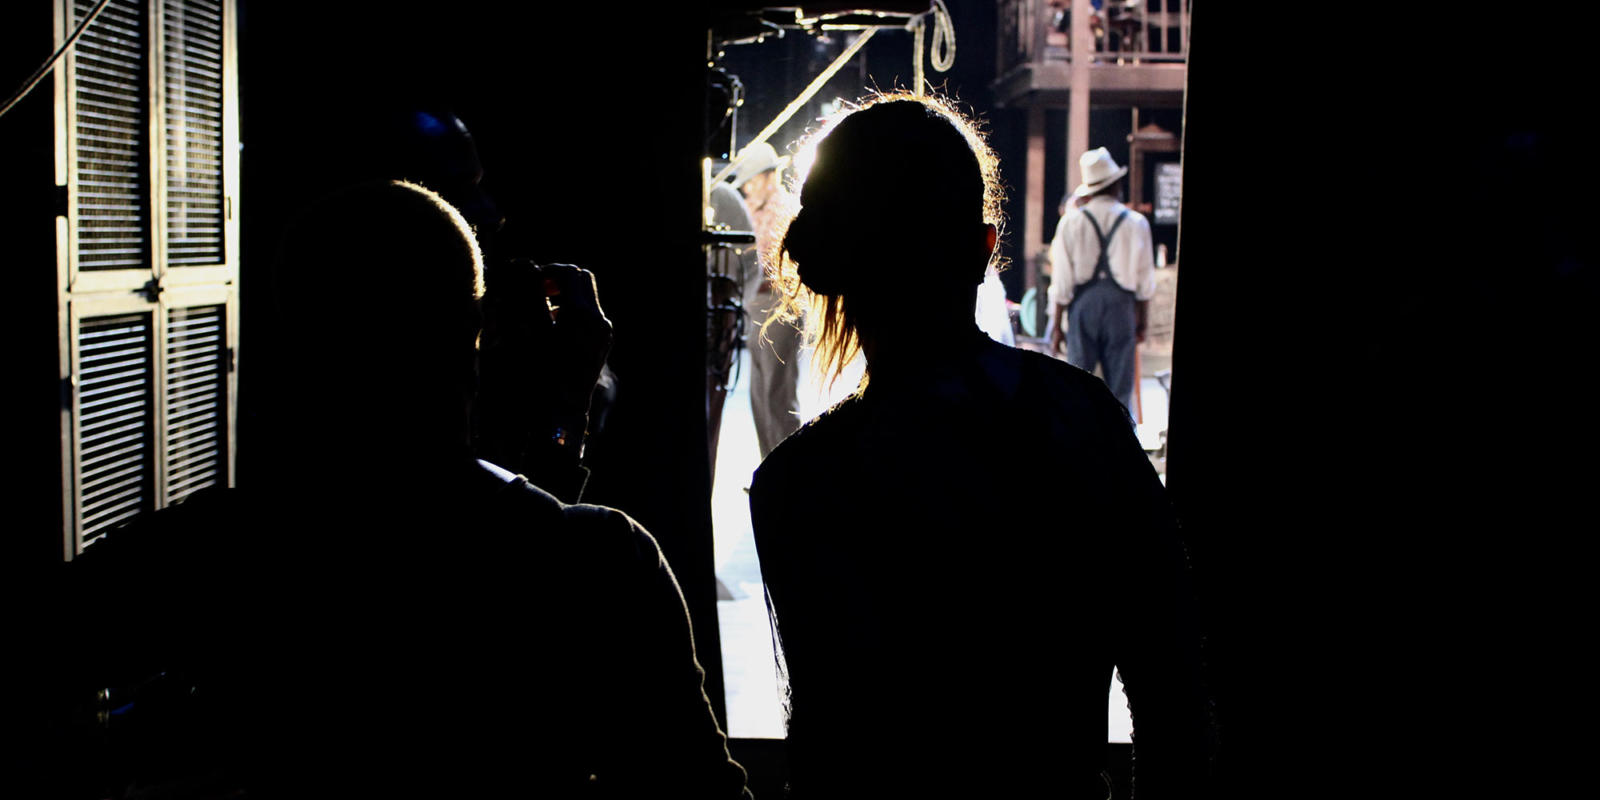 Members of the Stage Management Team look on at the performance from the wings